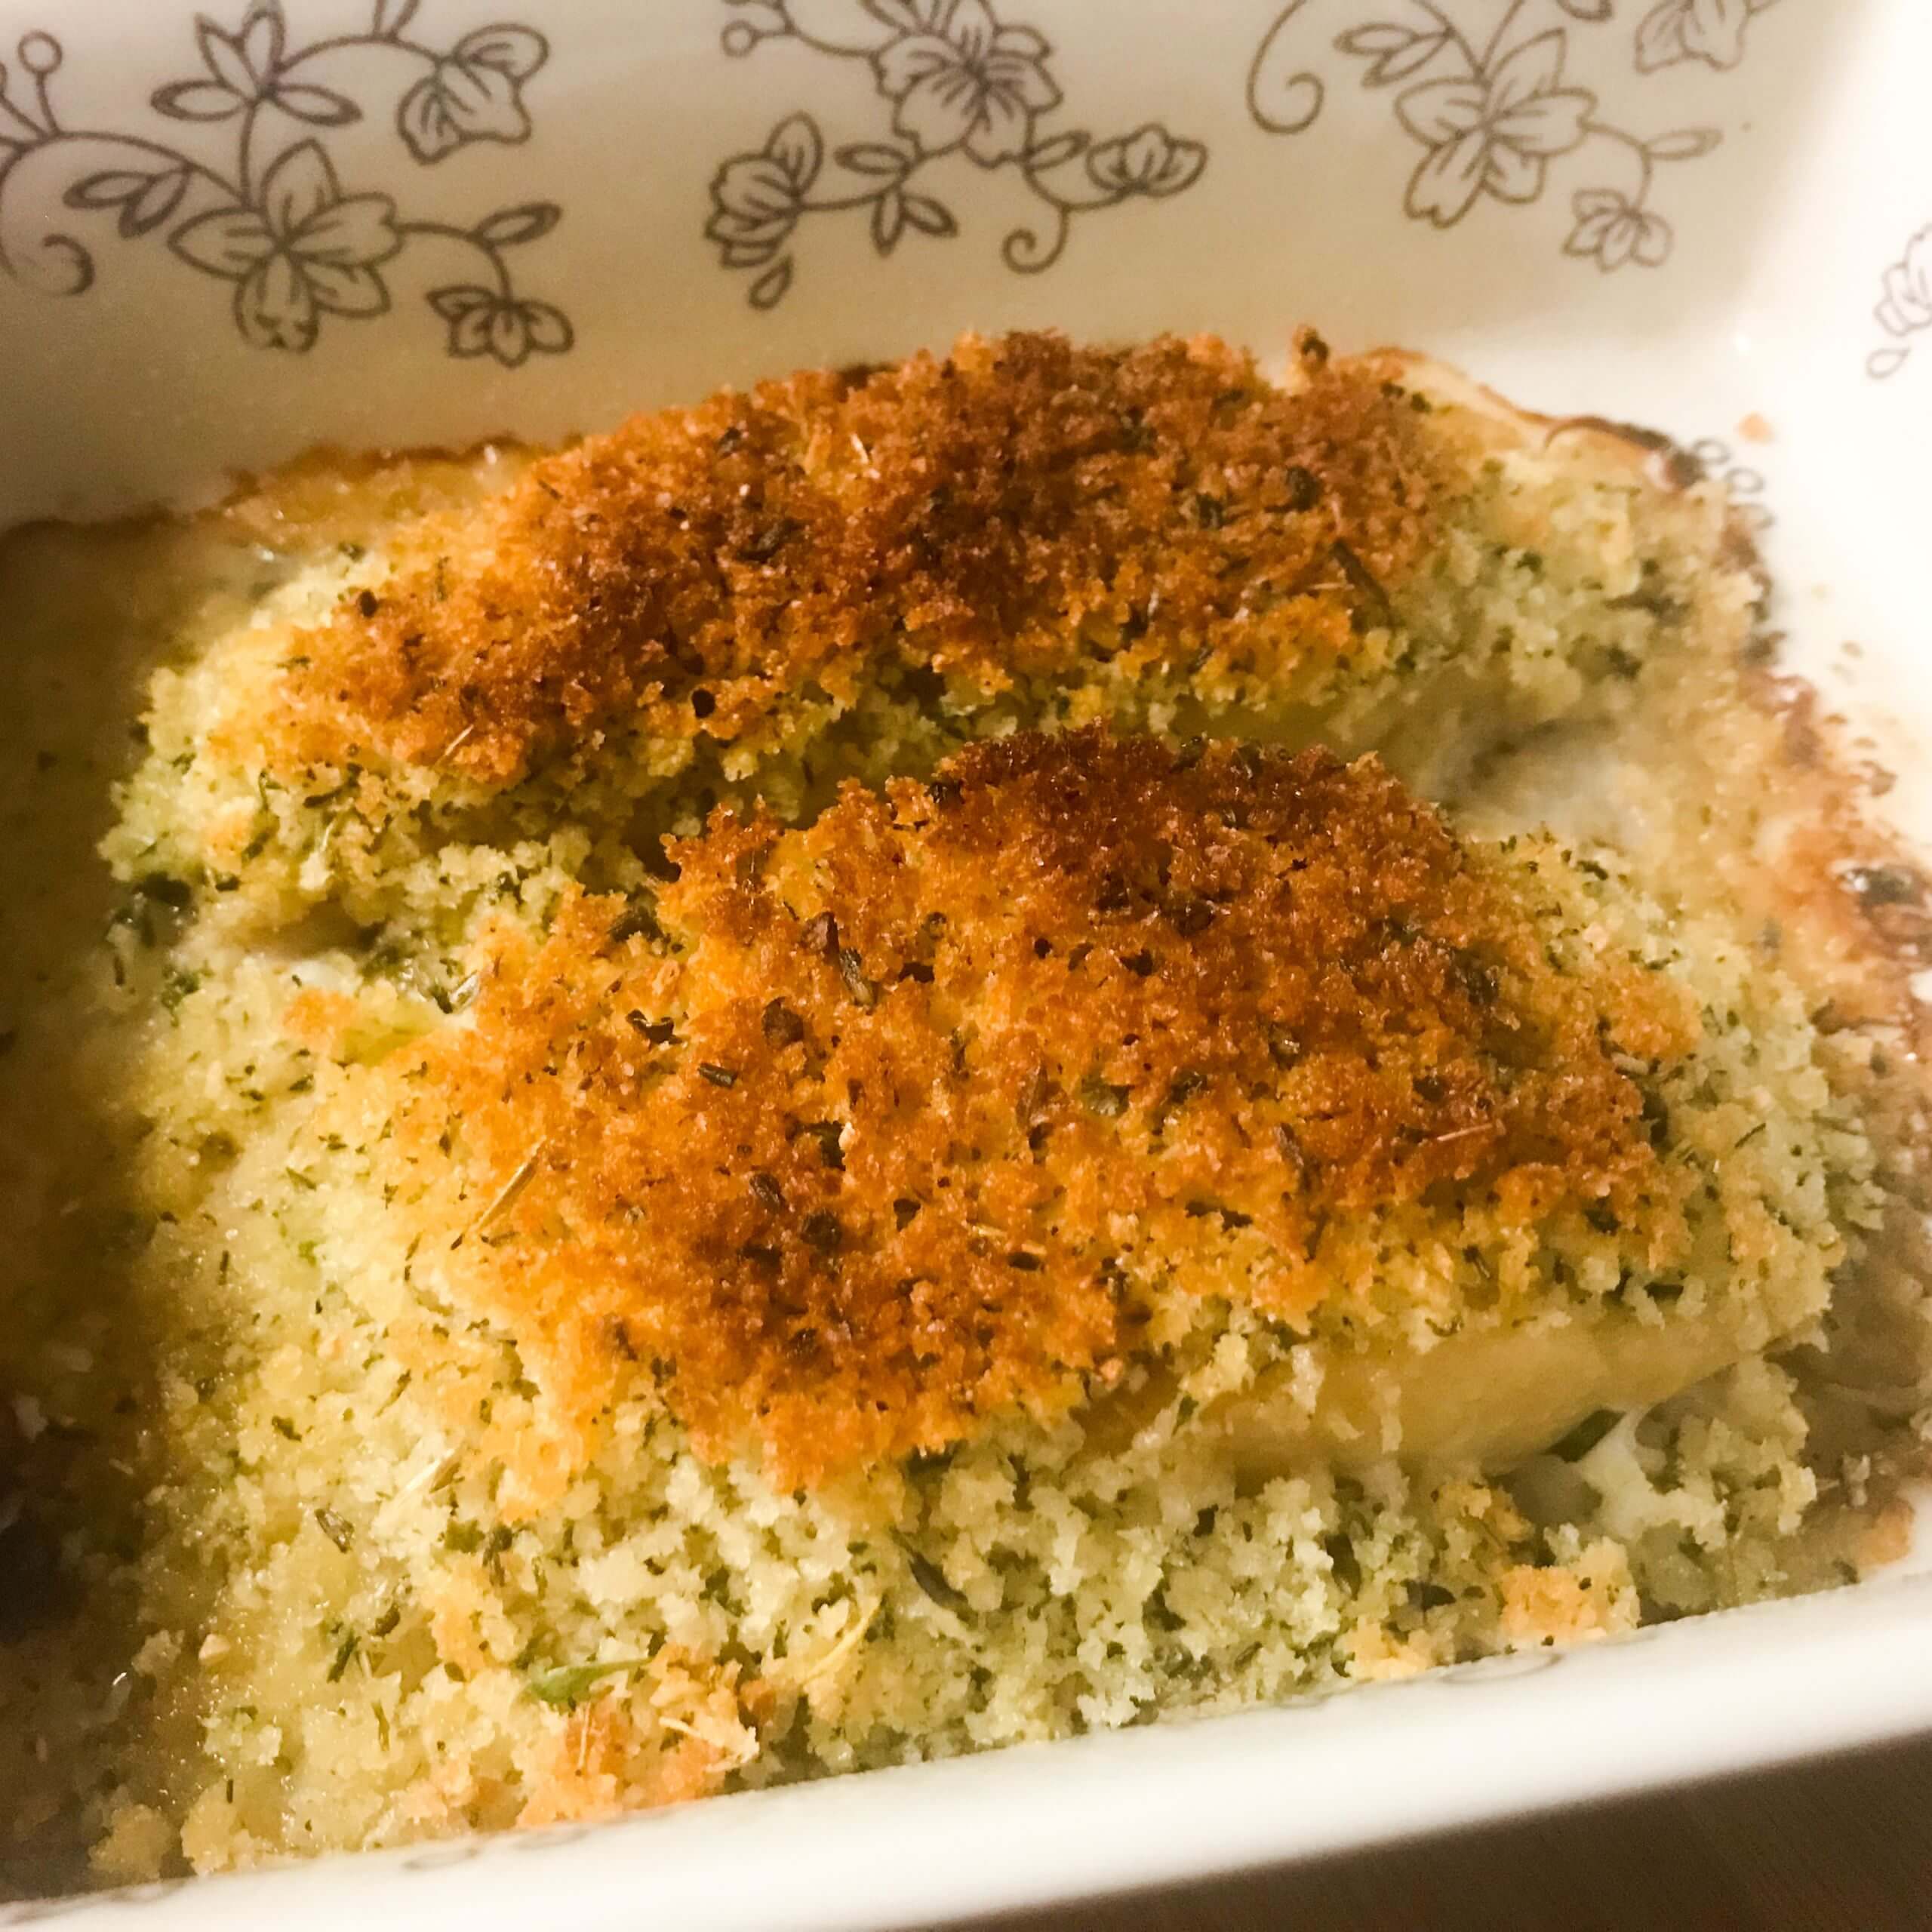 cooked panko crusted cod | my curated tastes